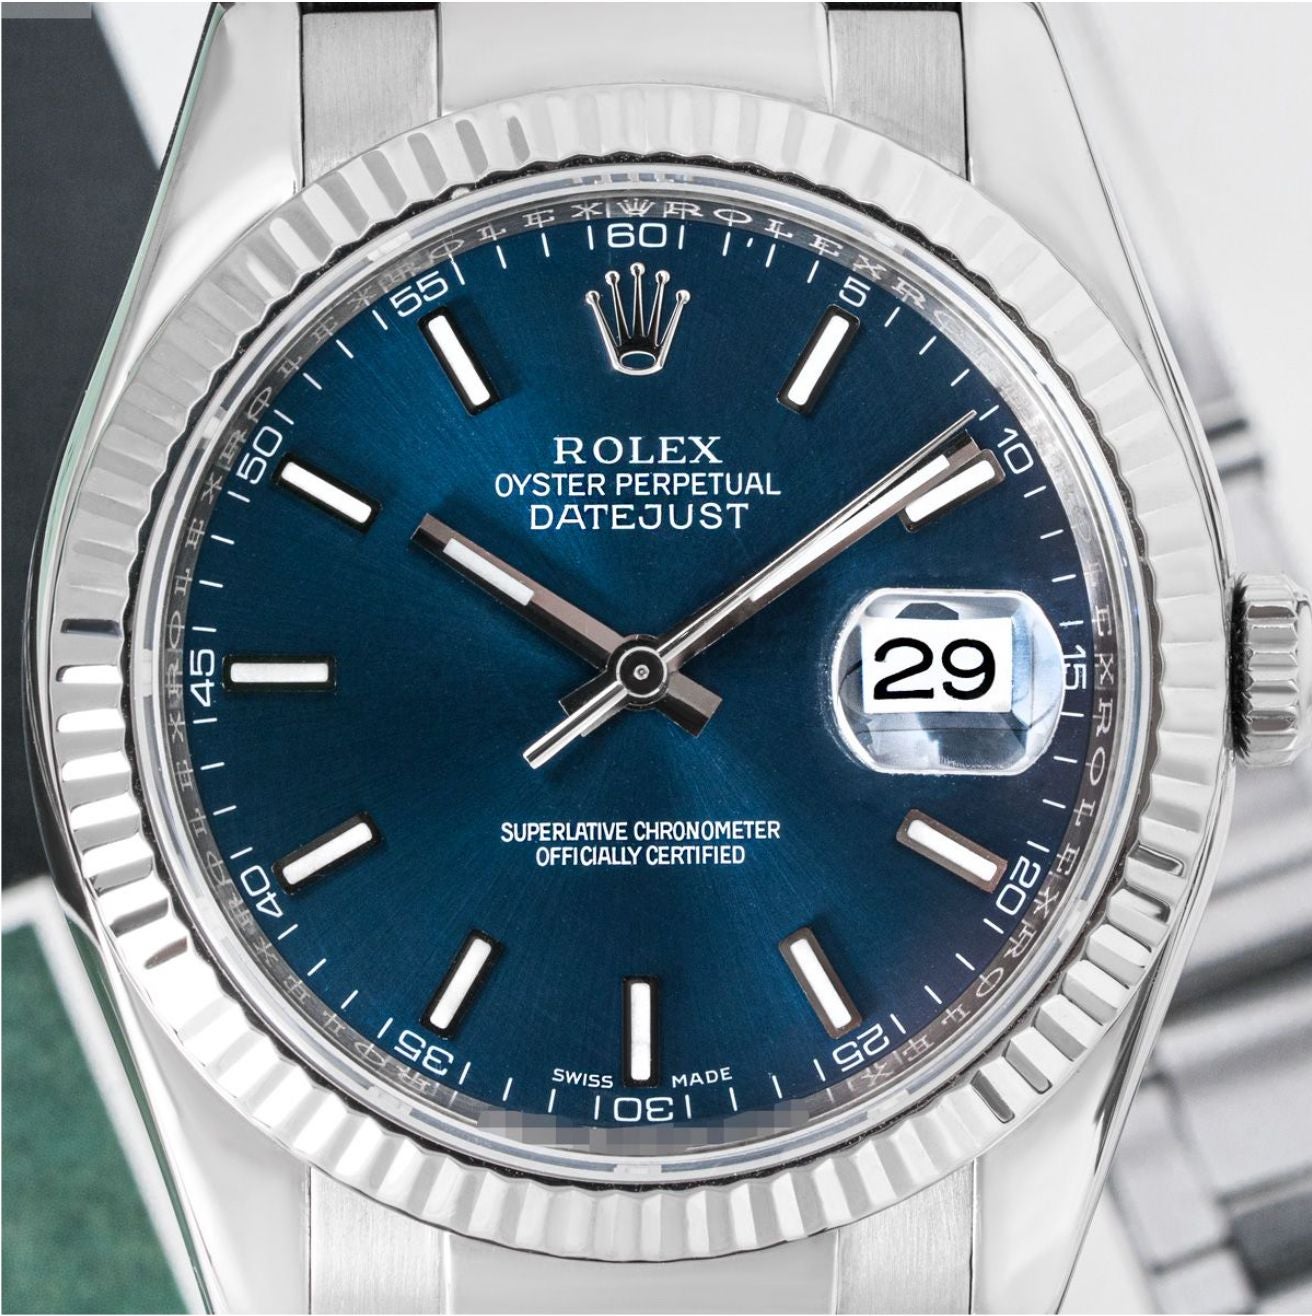 A white gold Datejust by Rolex. Featuring a blue dial with applied hour markers and a white gold fluted bezel. Fitted with a sapphire glass, a self-winding automatic movement and an original blue leather strap equipped with a Rolex white gold